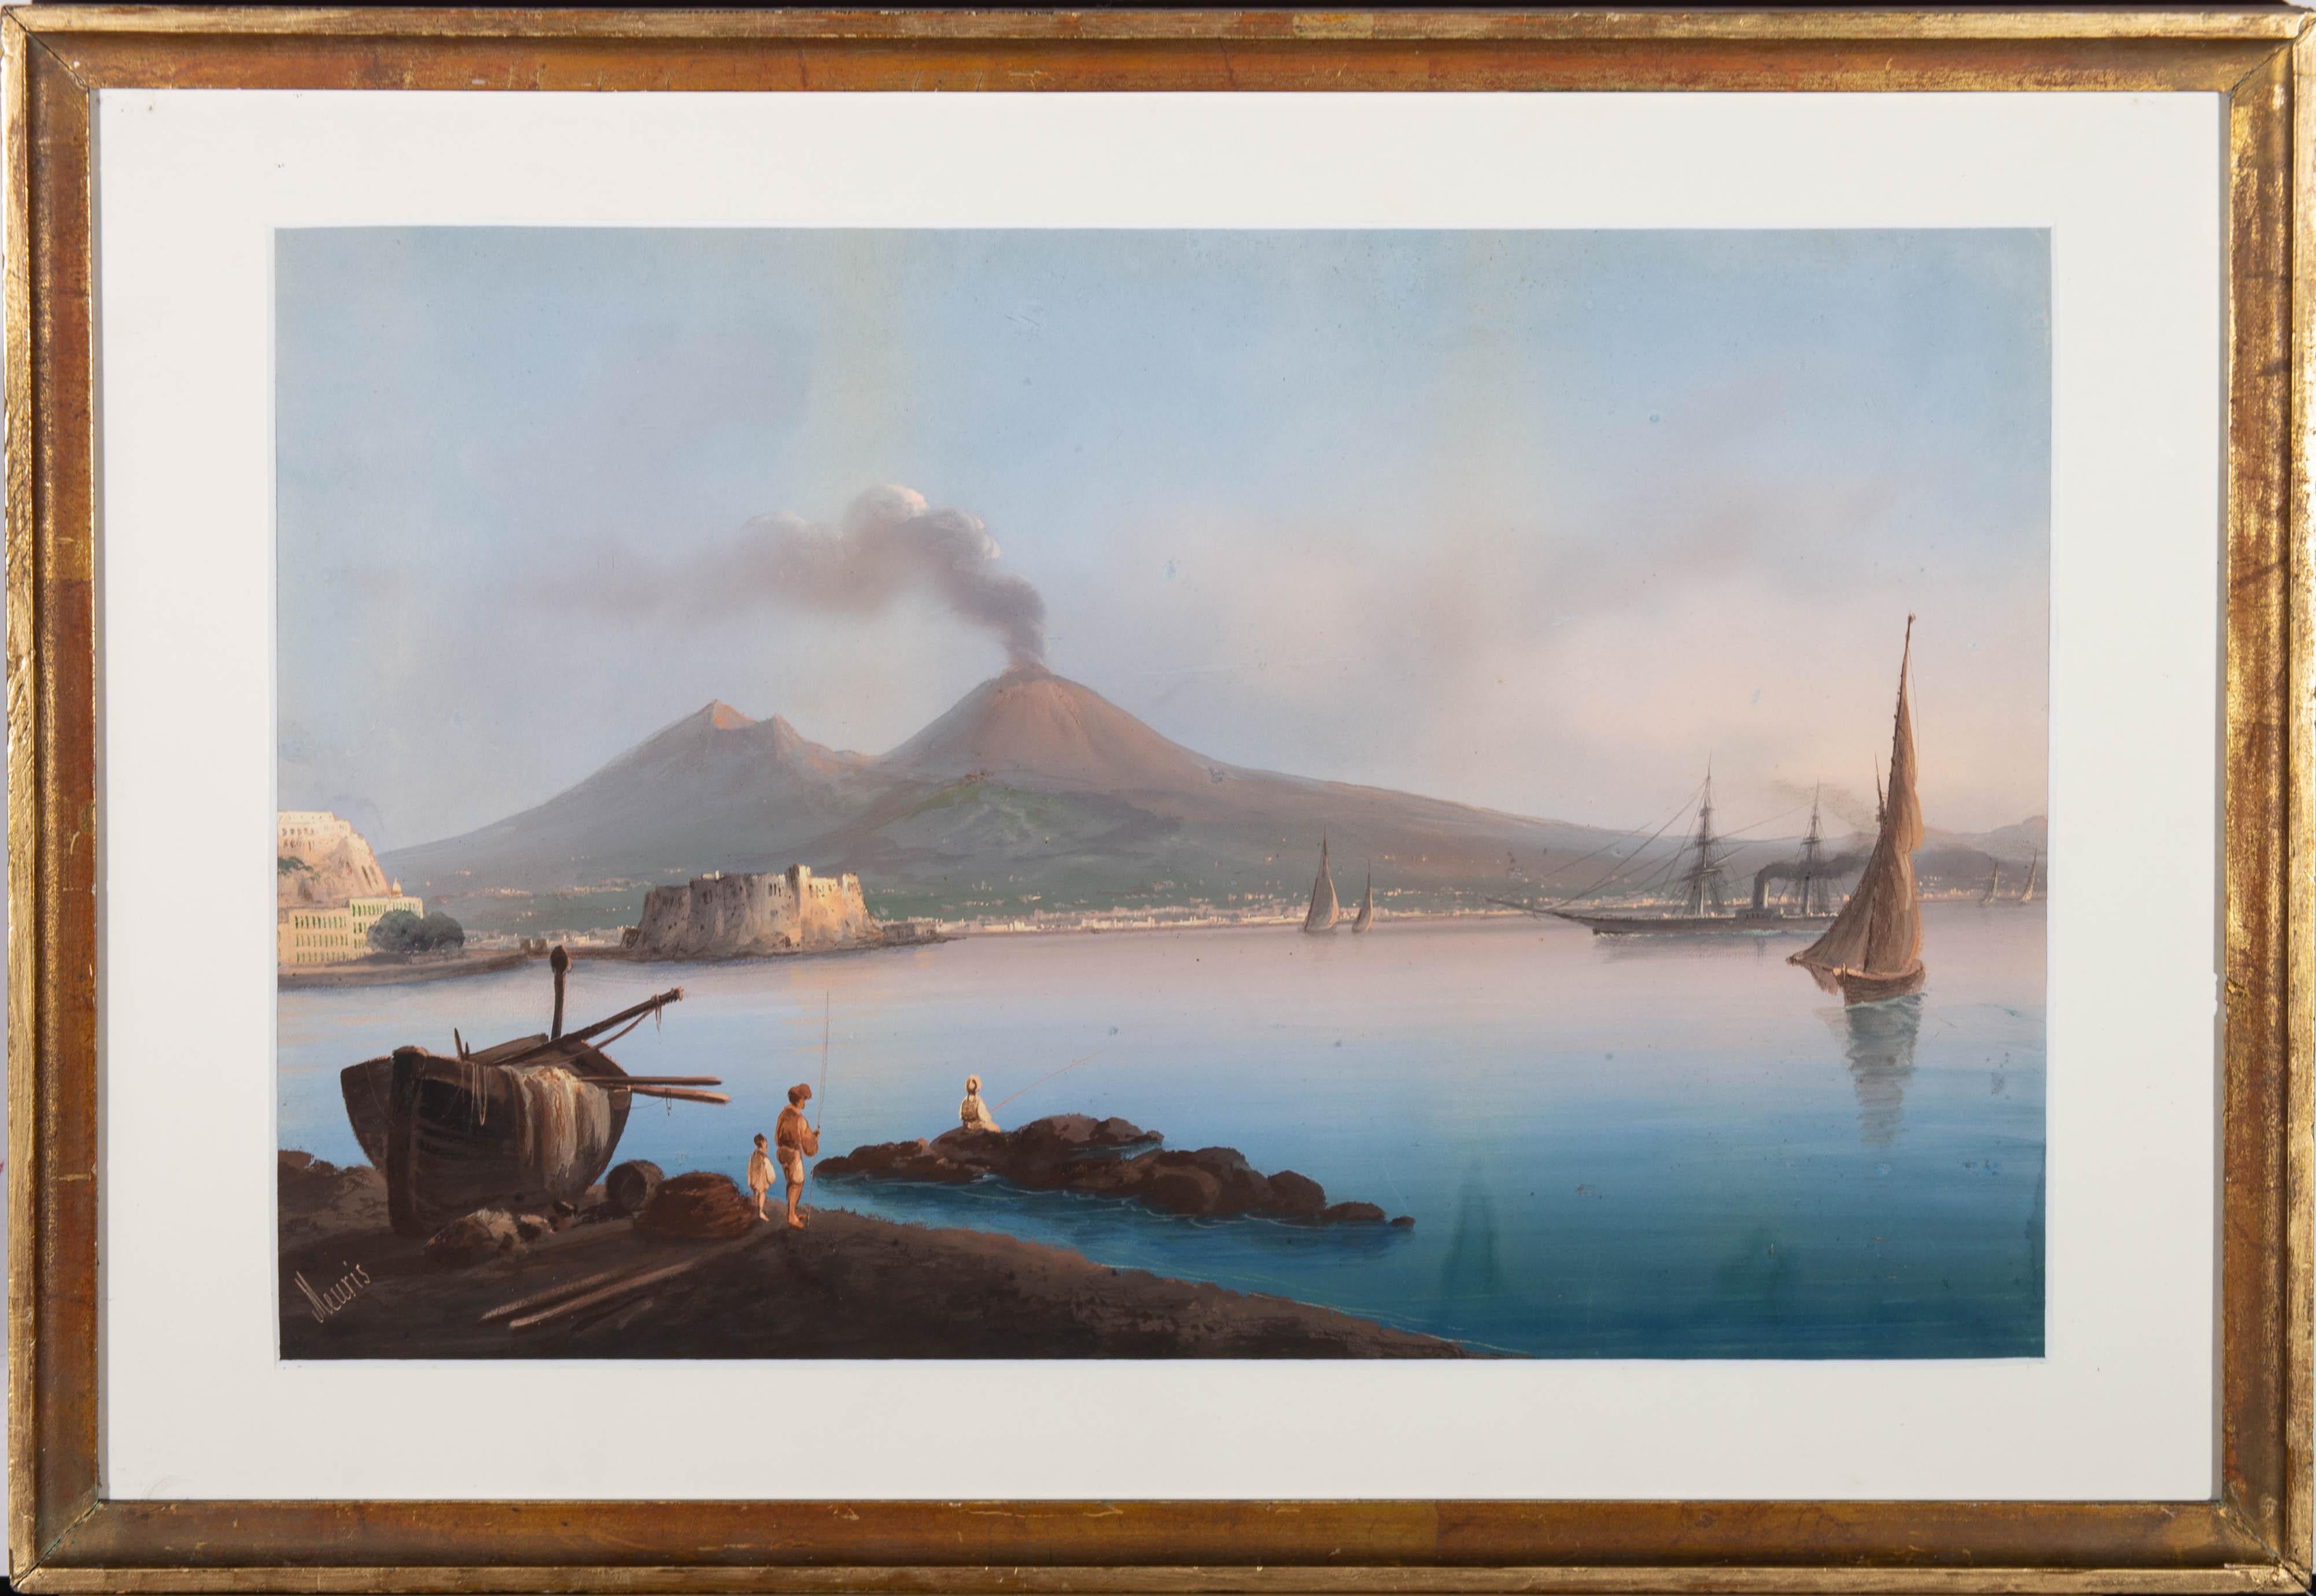 A fine gouache depiction of the imposing Mount Vesuvius, smoke billowing from the summit, looming over the Bay of Naples on the South-Western coast of Italy. The gulf area is known for its proximity to both the Ancient Roman cities of Pompeii and